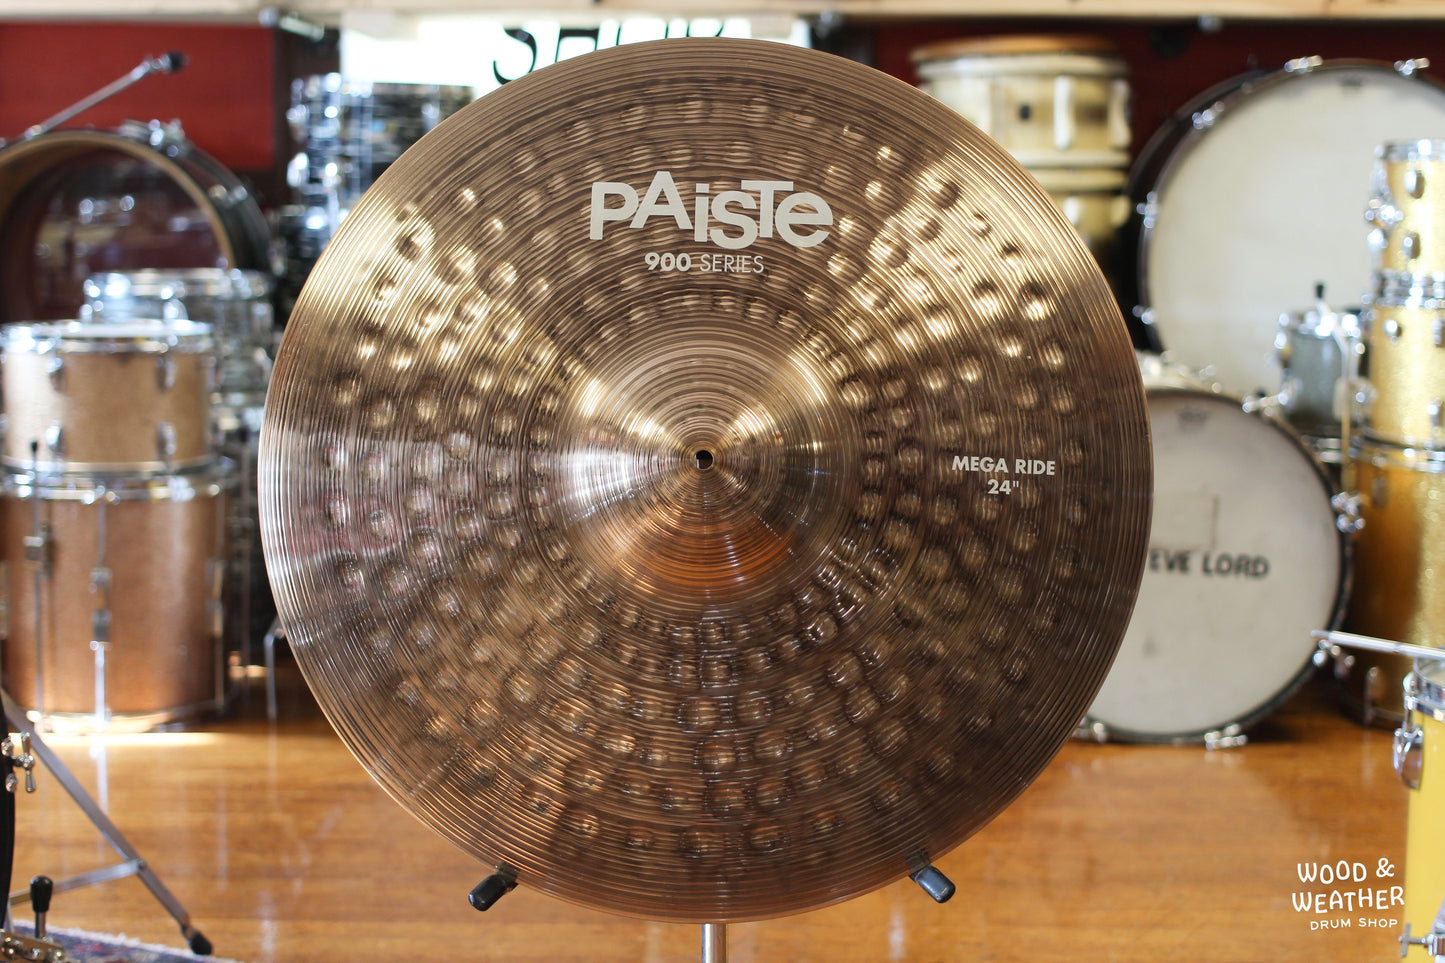 Used Paiste 24" 900 Series Mega Bell Ride Cymbal 4128g